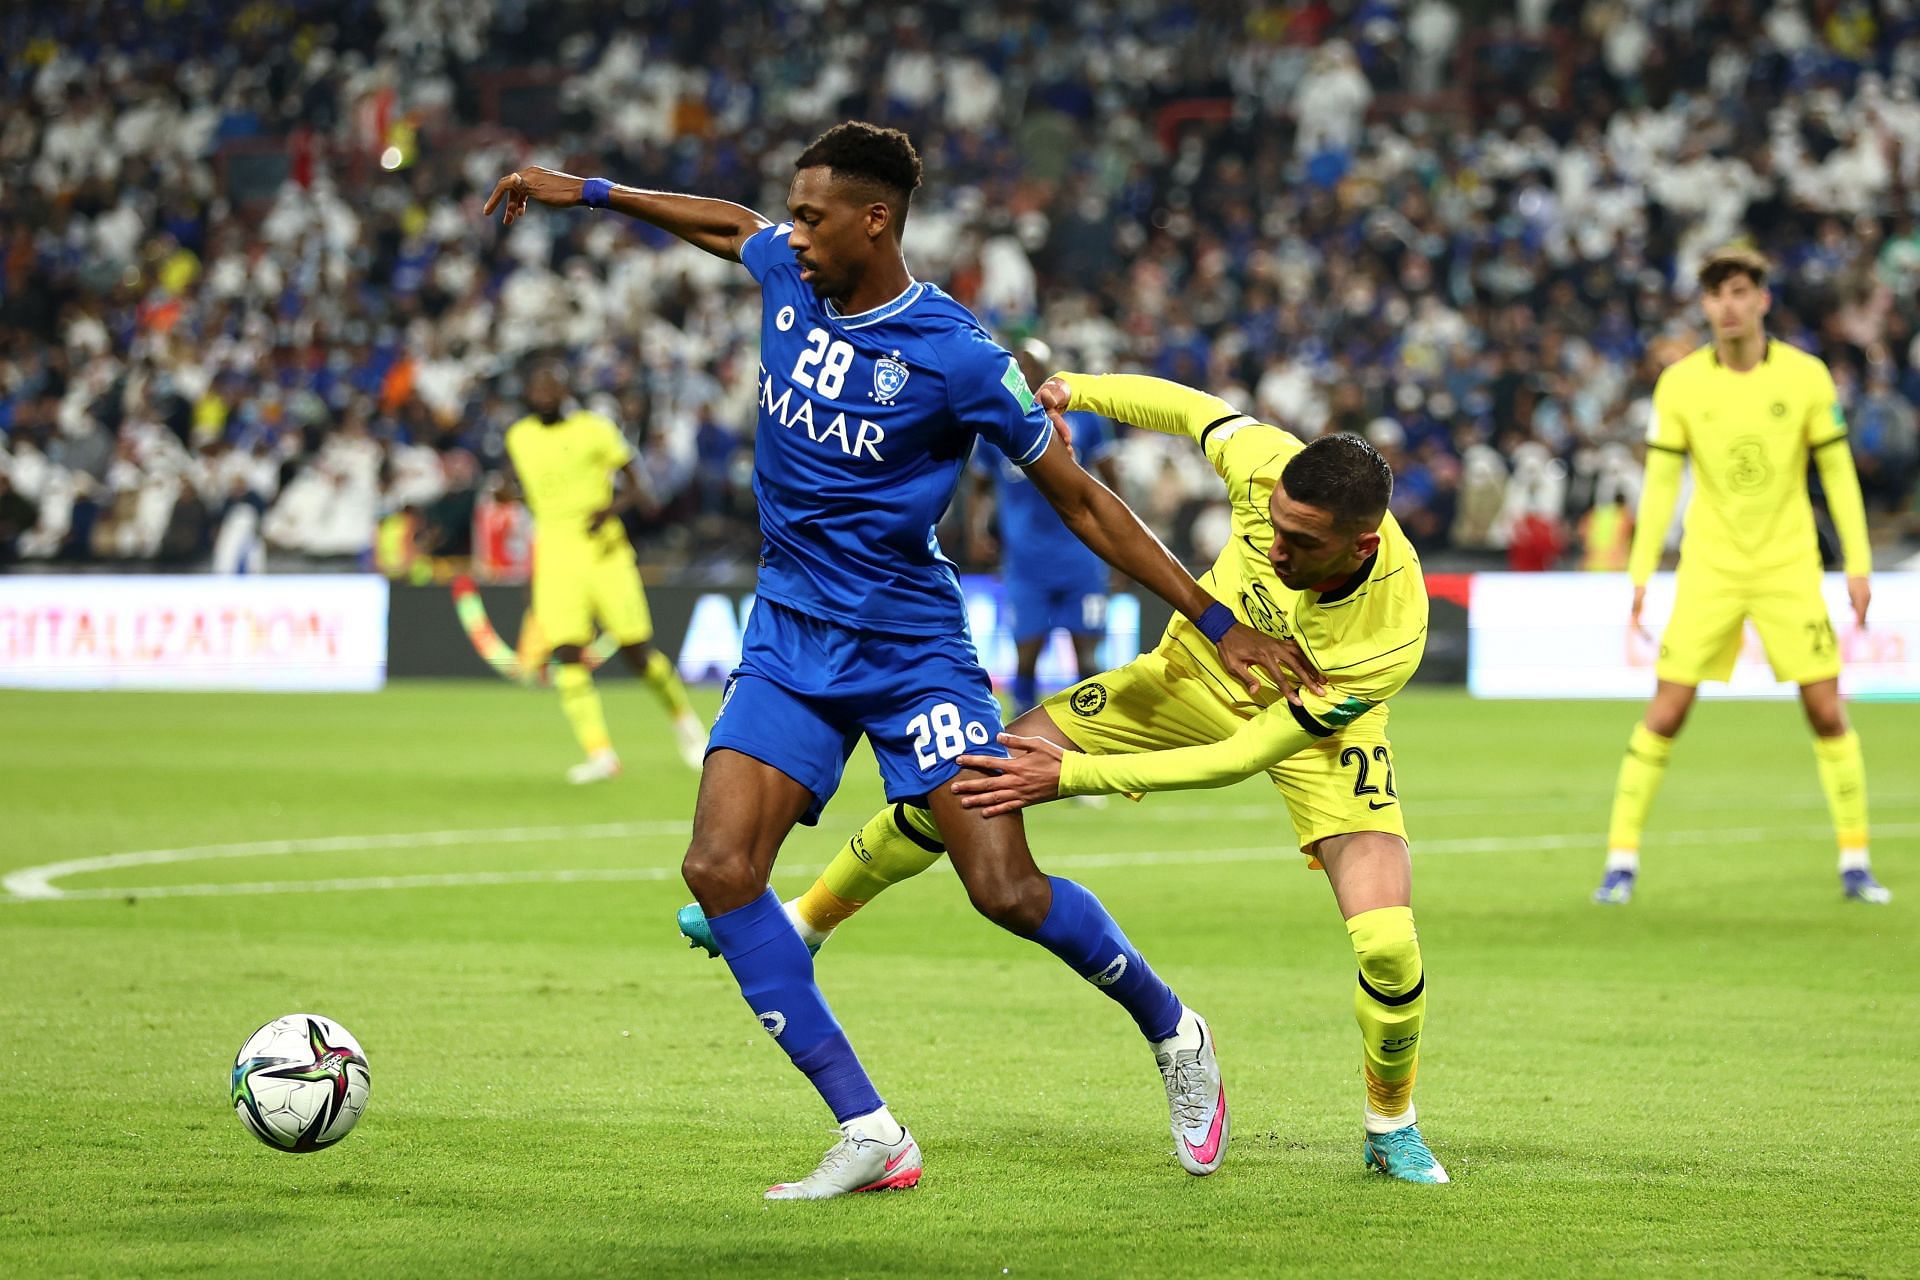 Al Hilal are in the semi-finals for the second time in three years